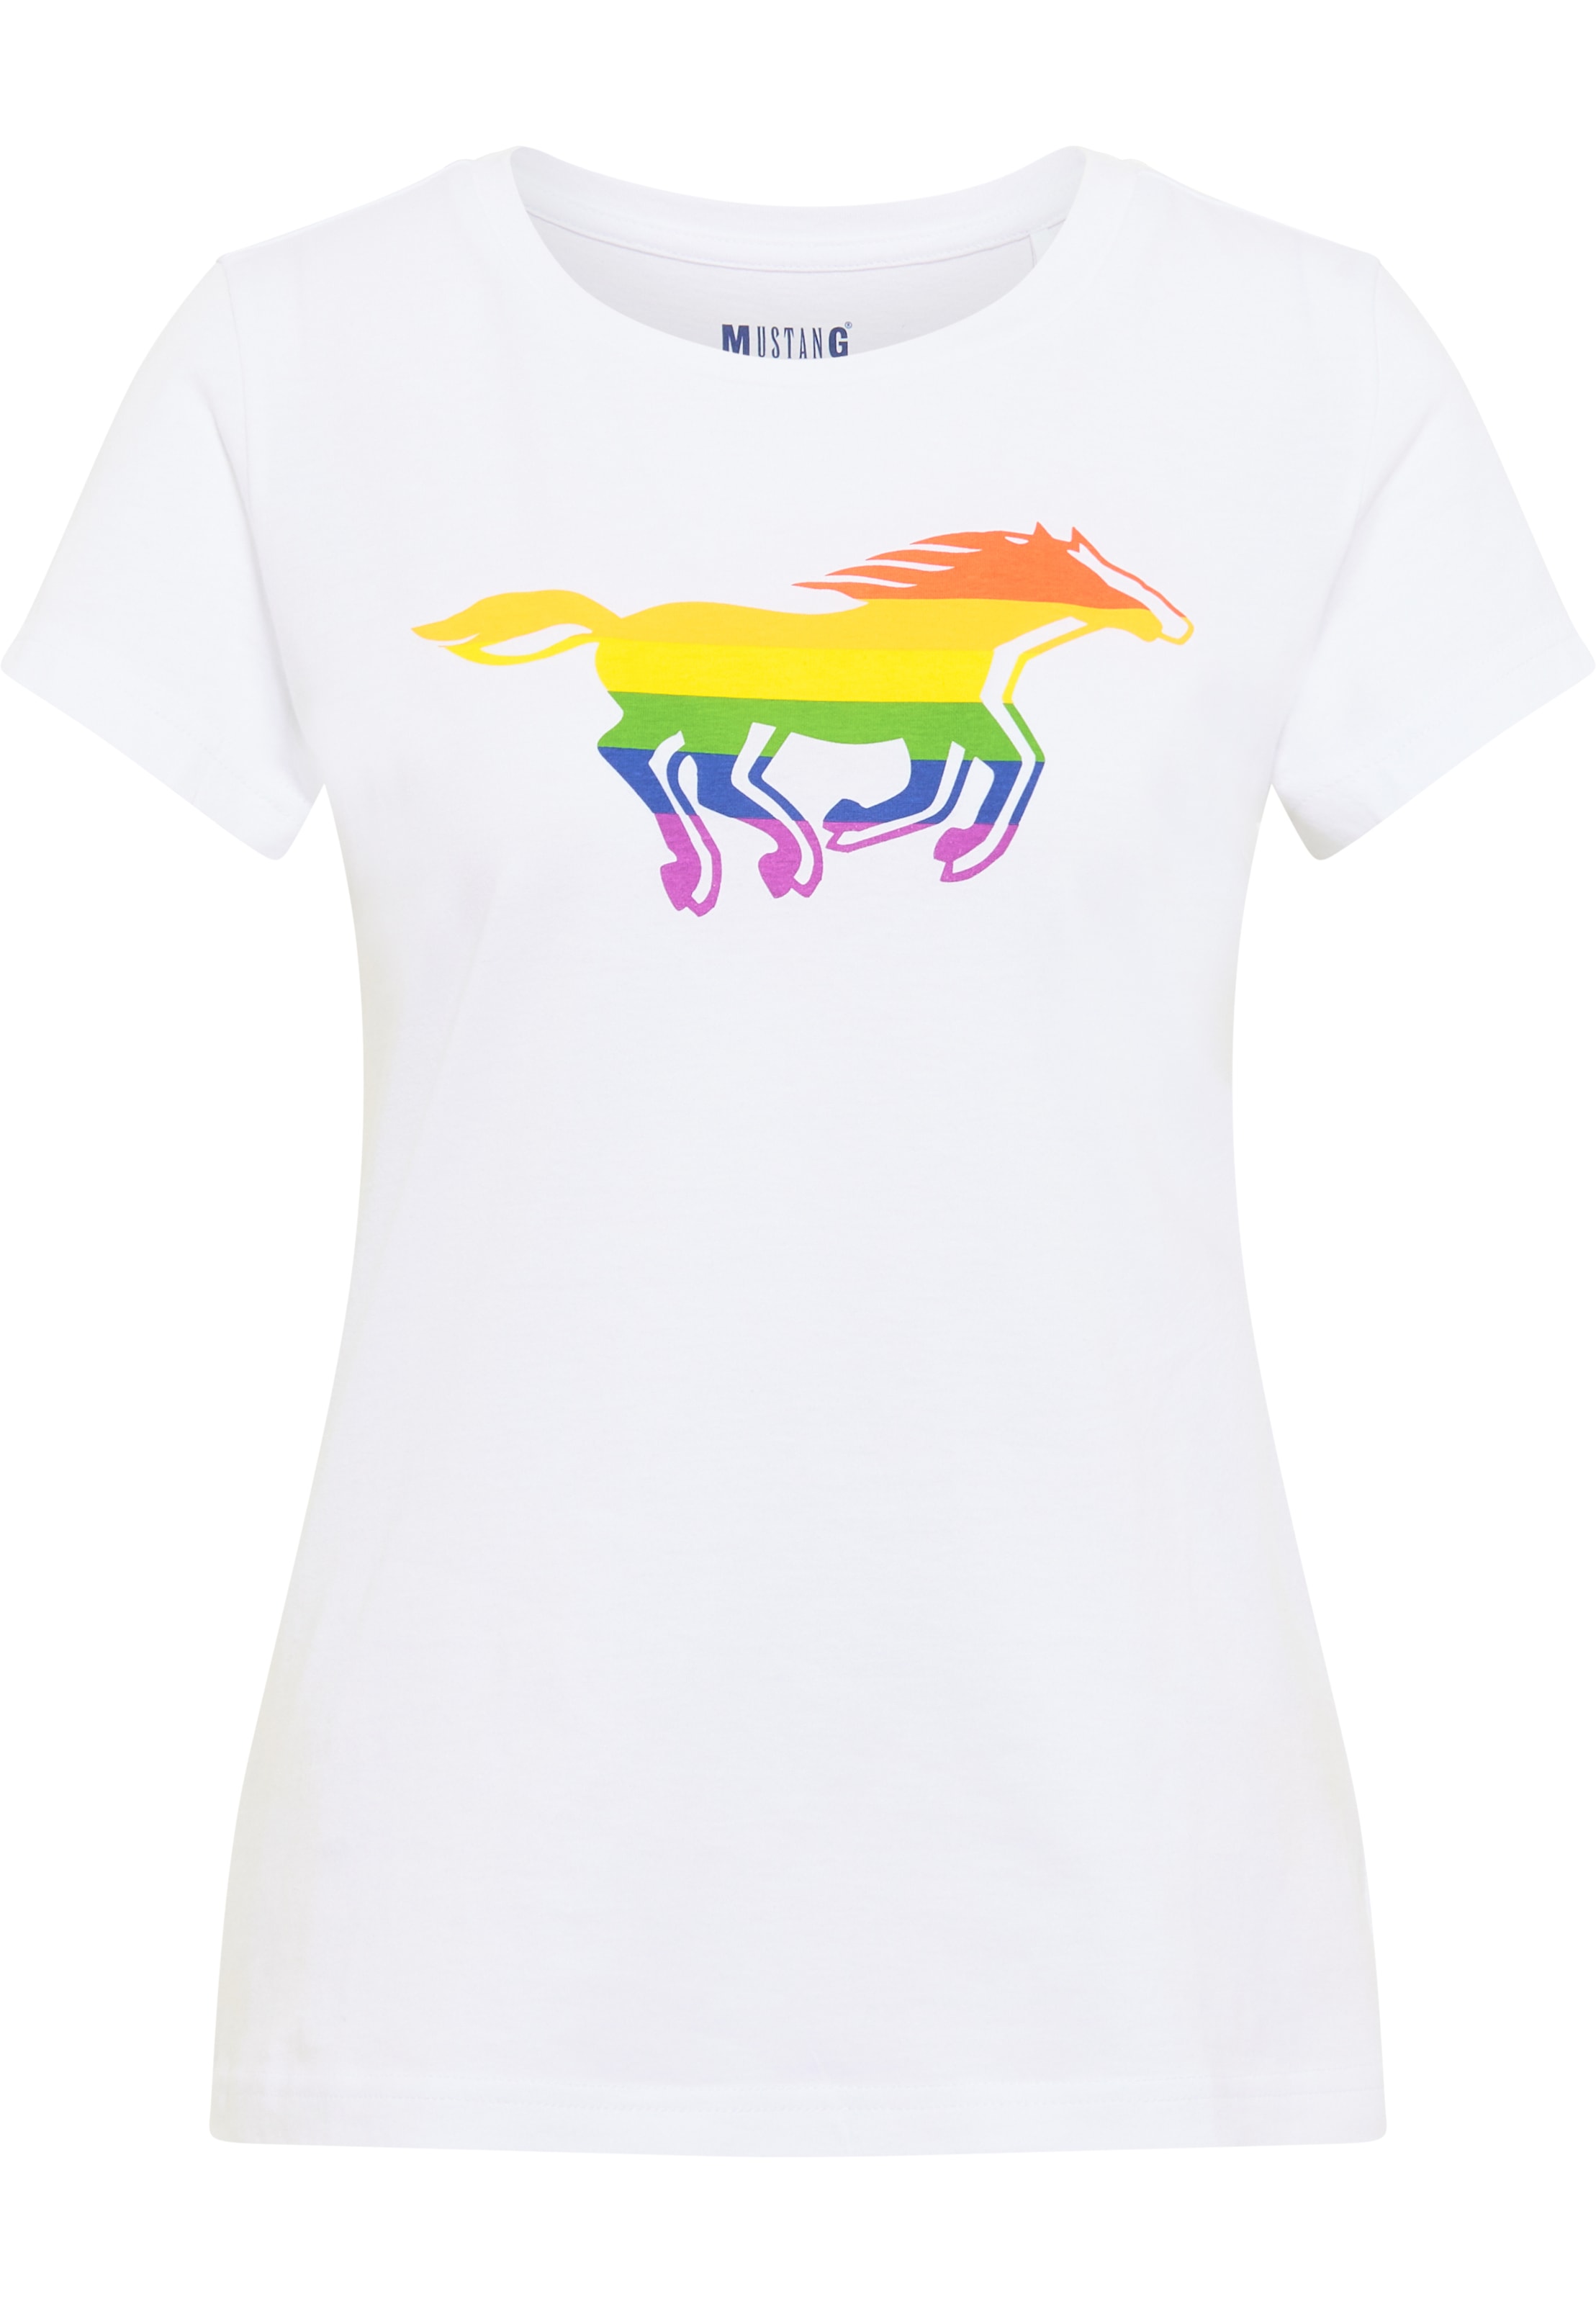 »Alexia C MUSTANG Pride« OTTOversand bei T-Shirt